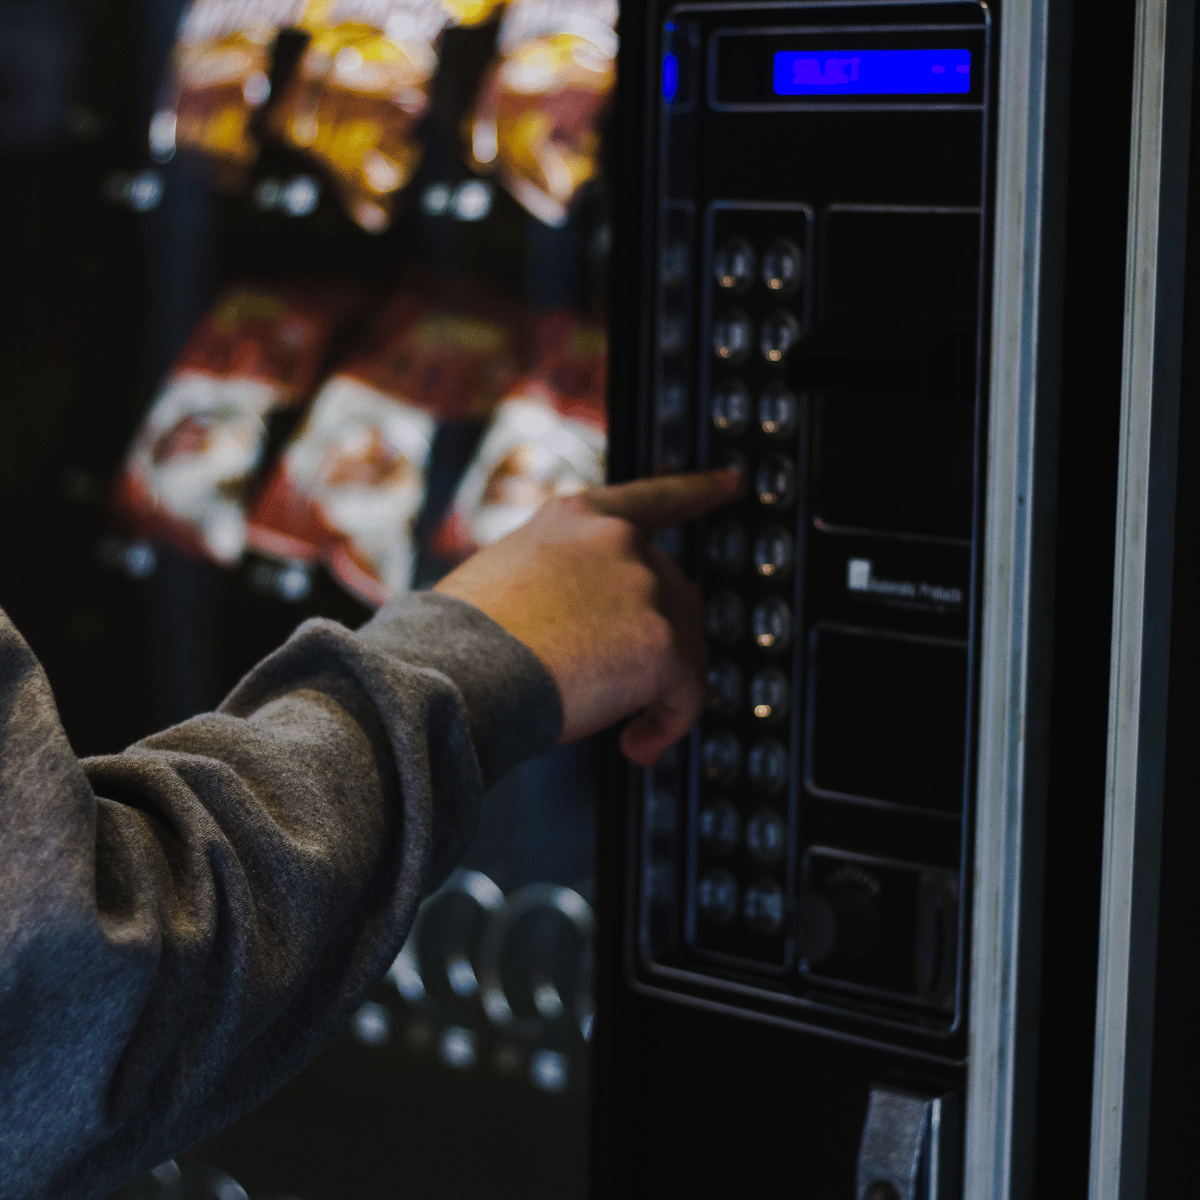 USED VENDING MACHINES MIGHT BE THE BEST SOLUTION